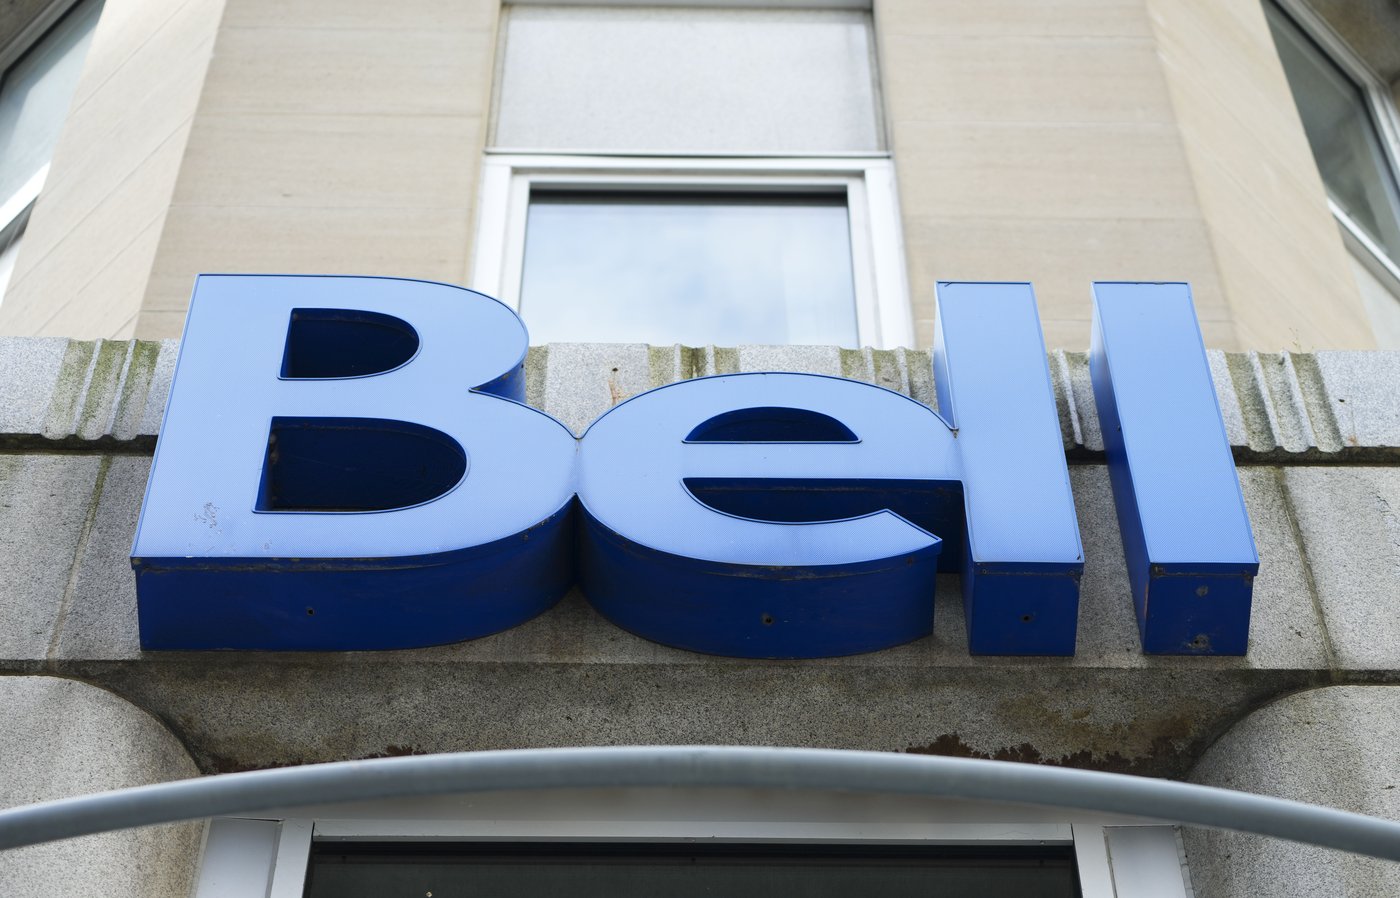 Bell Media to cut 43 technicians as part of previously announced job losses